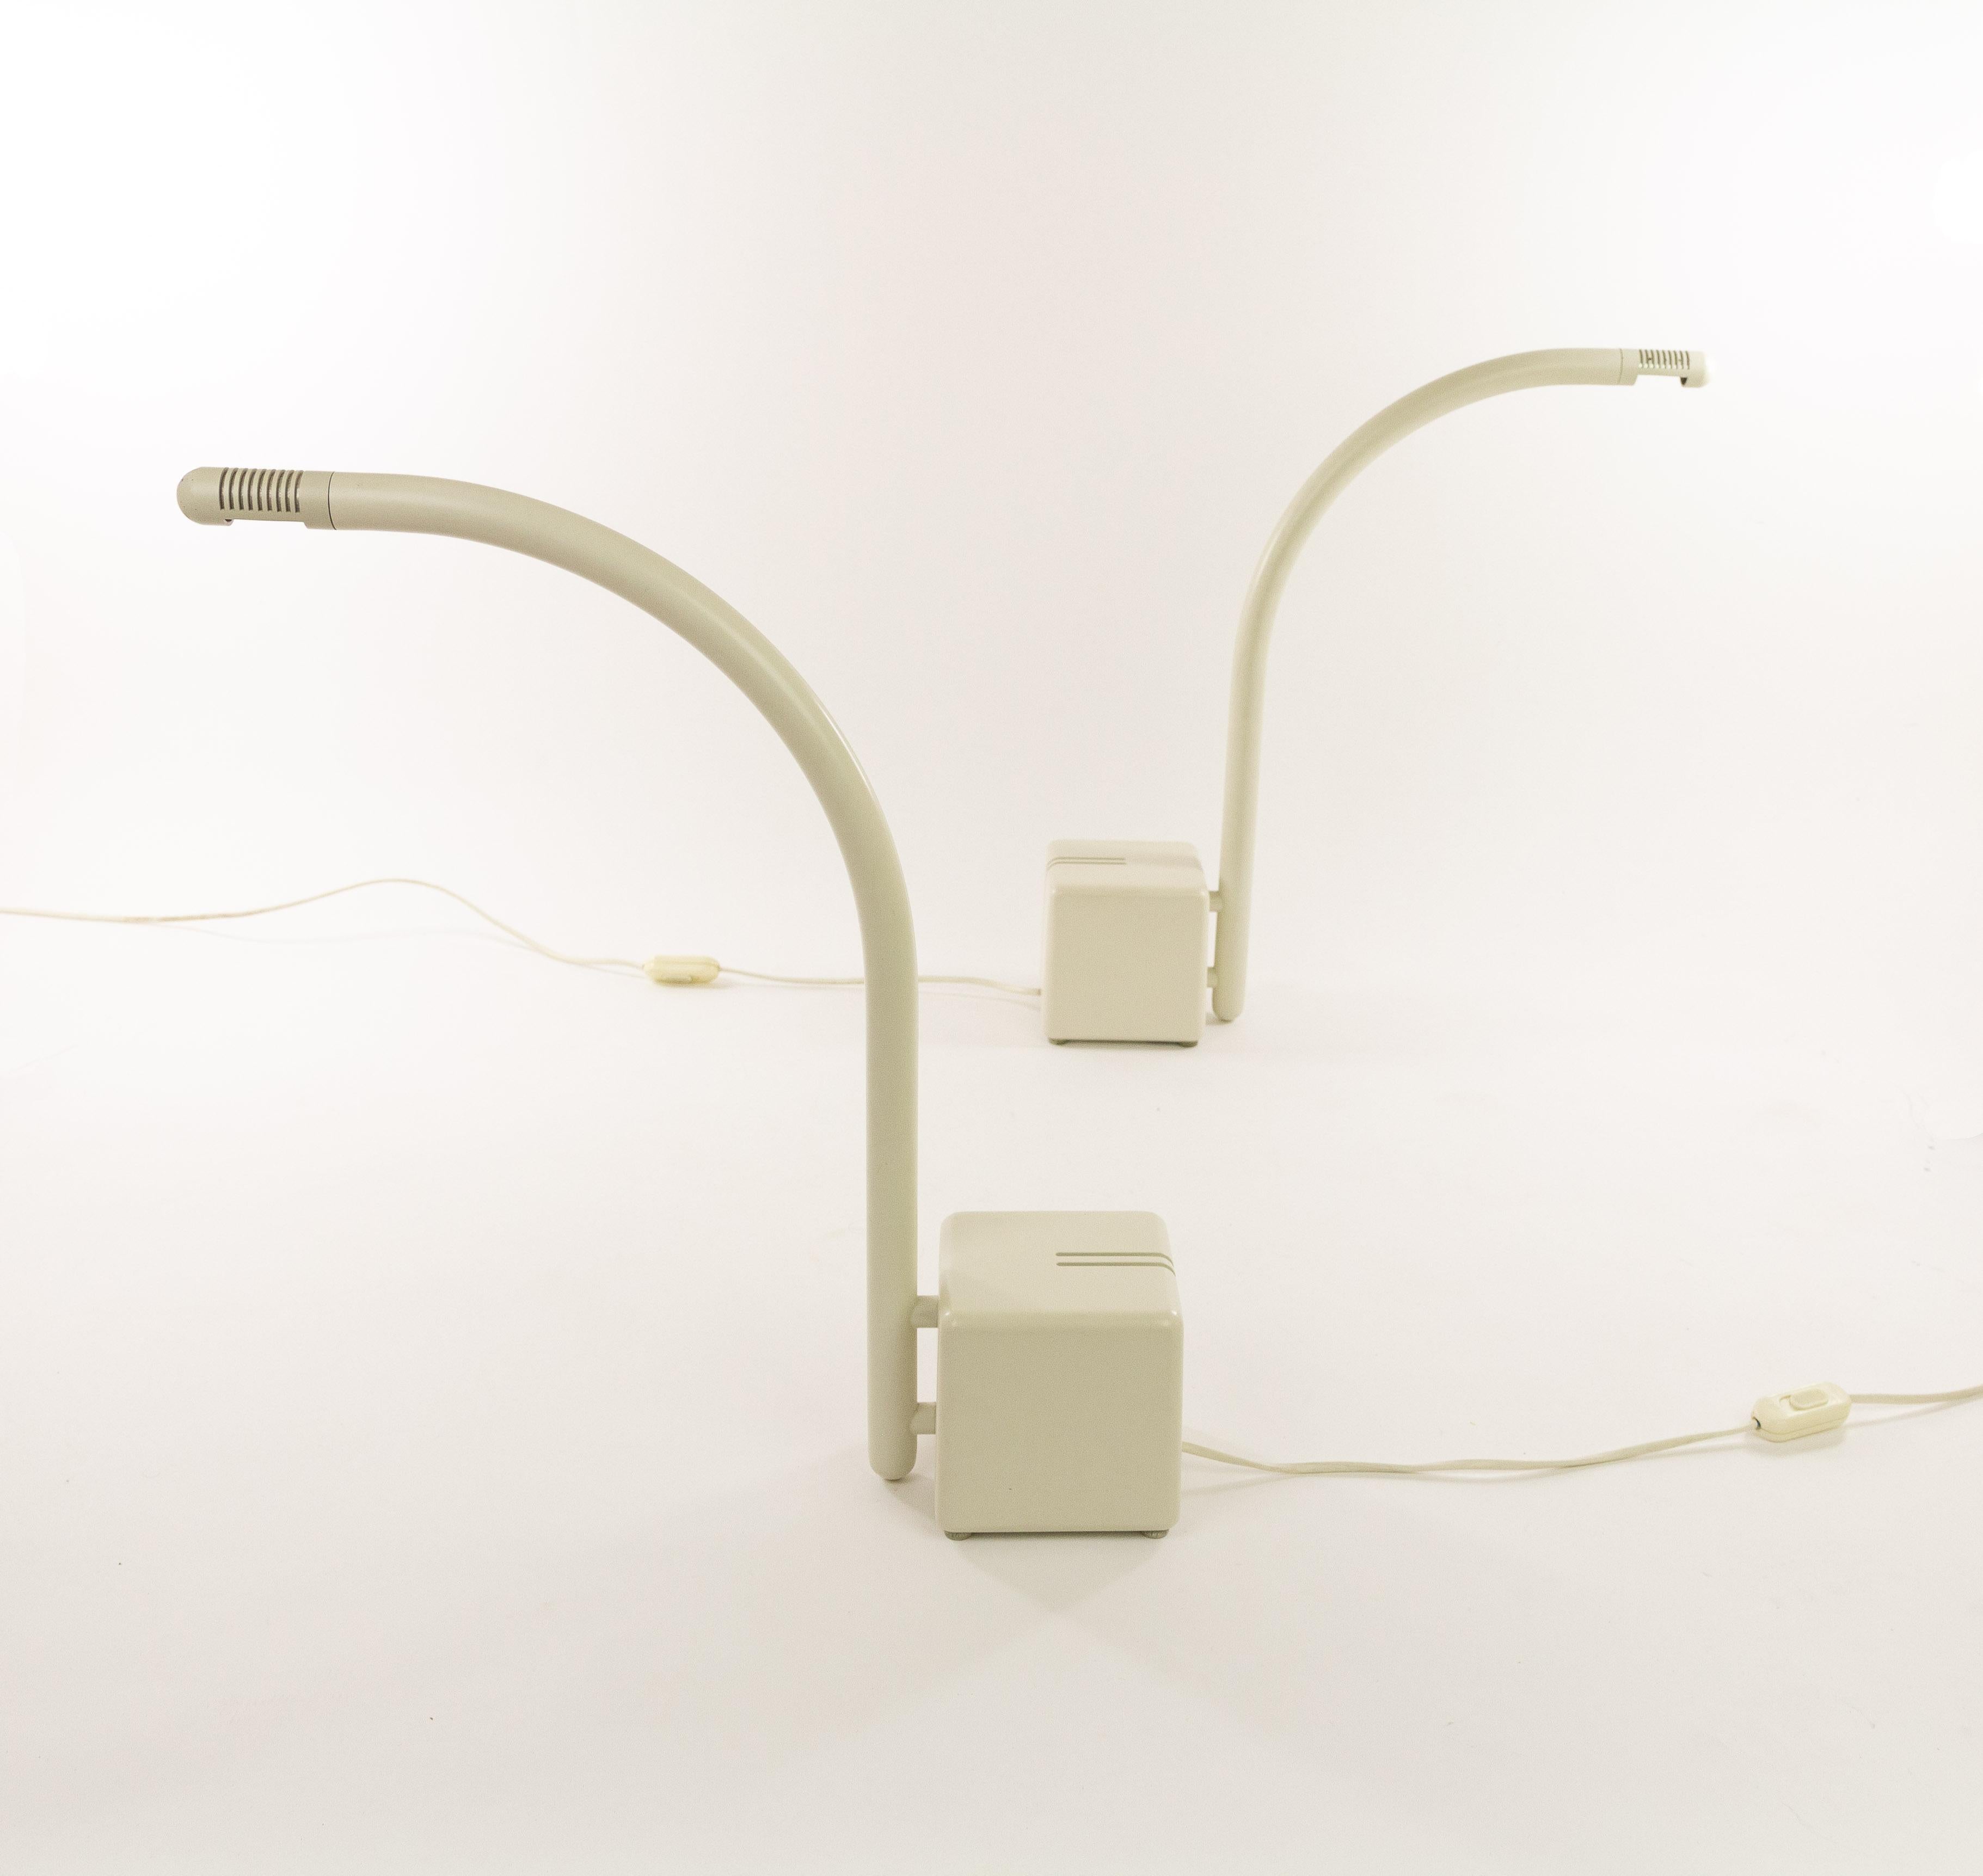 A pair of Minimalist halogen table lamps by Claus Bonderup & Torsten Thorup for Focus Denmark, designed and produced in the 1970s. The Focus article number is 3011.

The transformer of the lamp forms the, rather heavy, base of the lamp. The lamps